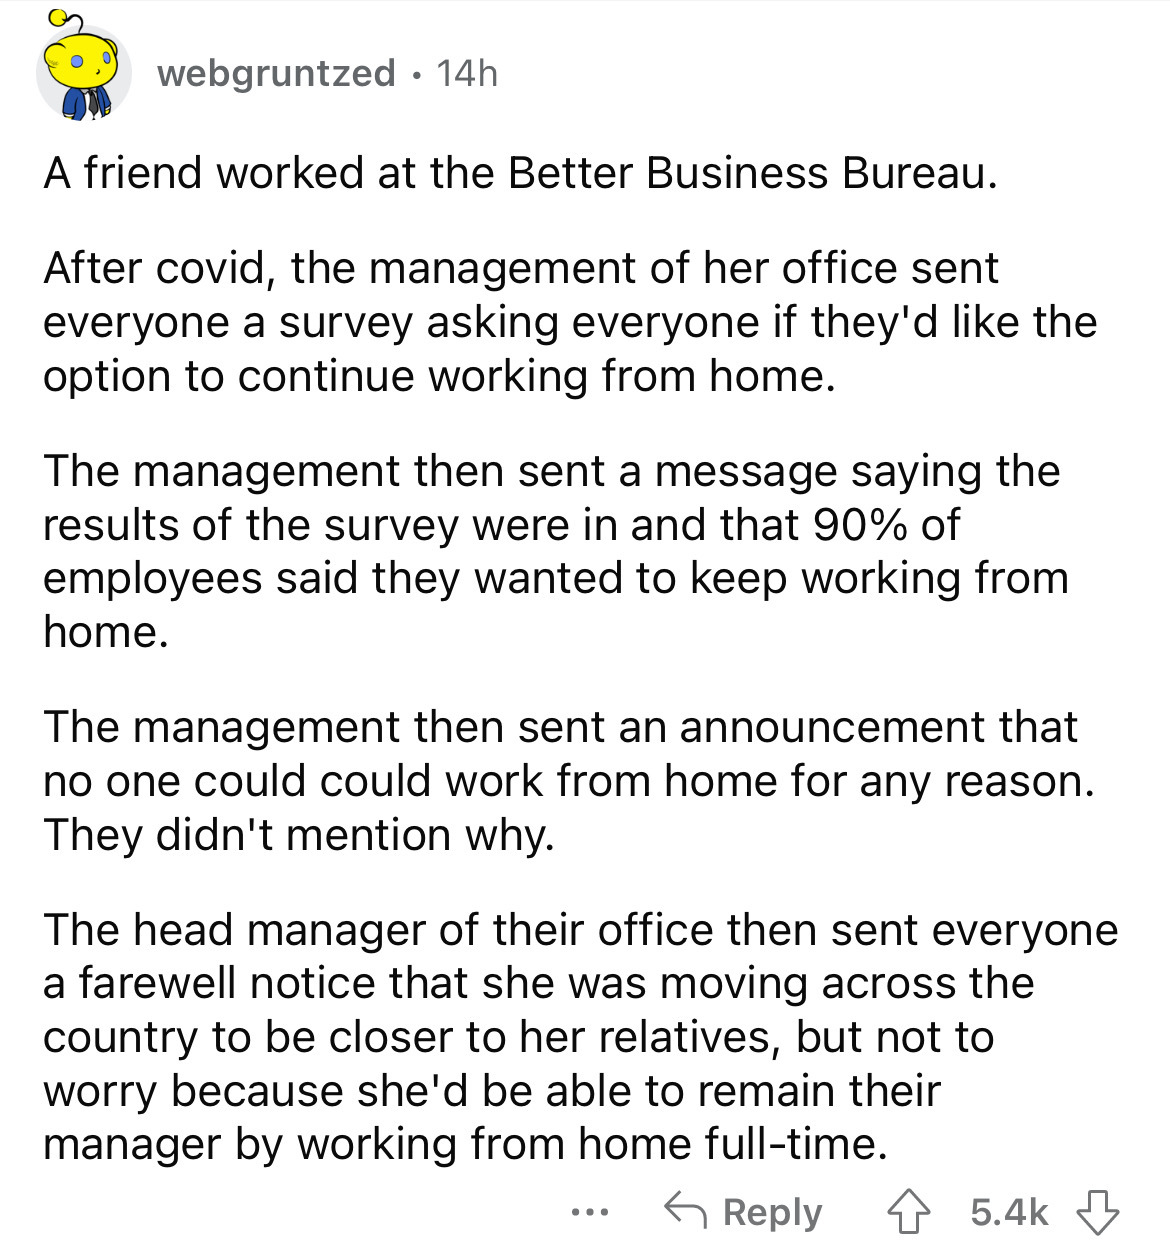 angle - webgruntzed 14h A friend worked at the Better Business Bureau. After covid, the management of her office sent everyone a survey asking everyone if they'd the option to continue working from home. The management then sent a message saying the resul